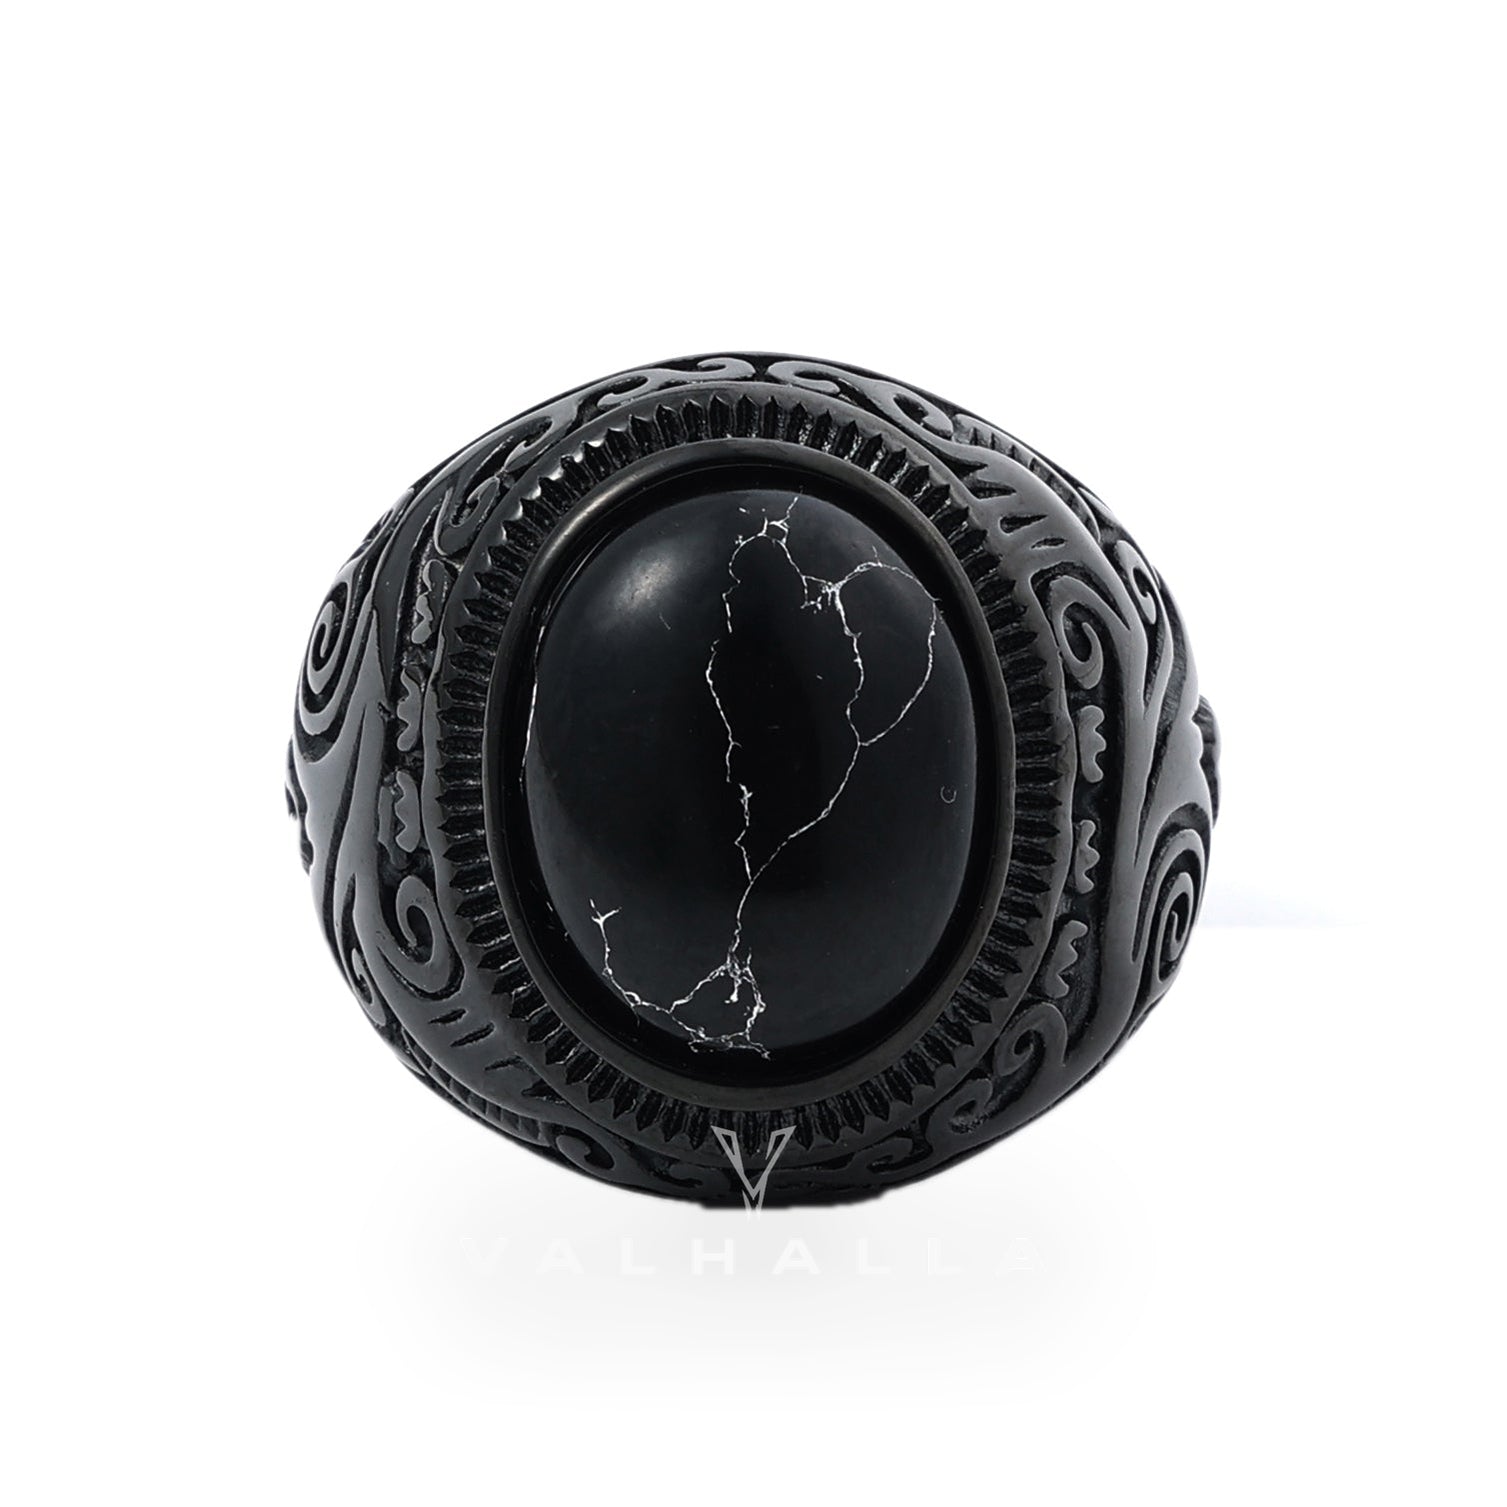 Black Turquoise Patterned Stainless Steel Ring